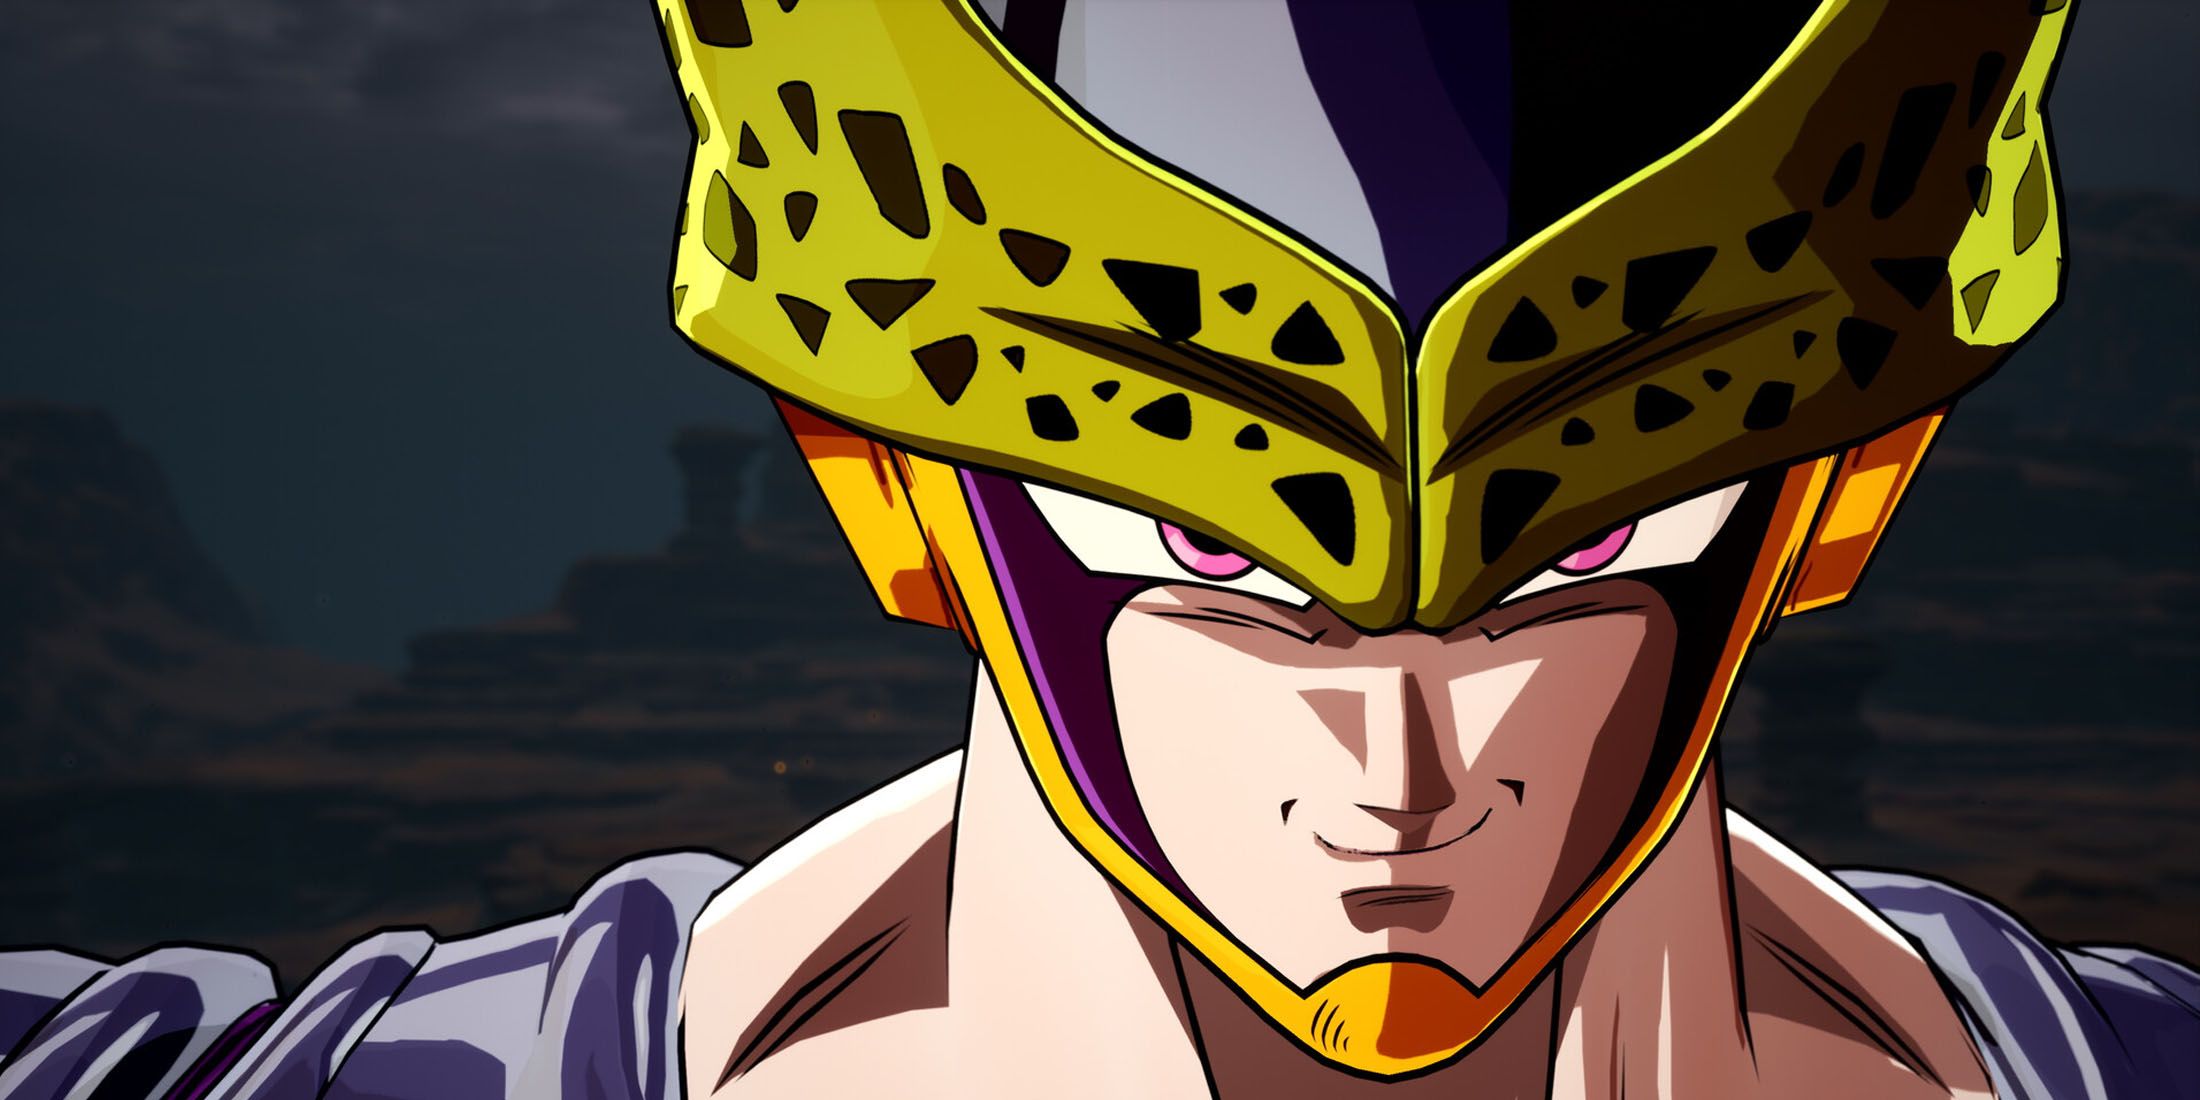 A close-up screenshot of Perfect Cell from Dragon Ball: Sparking Zero.